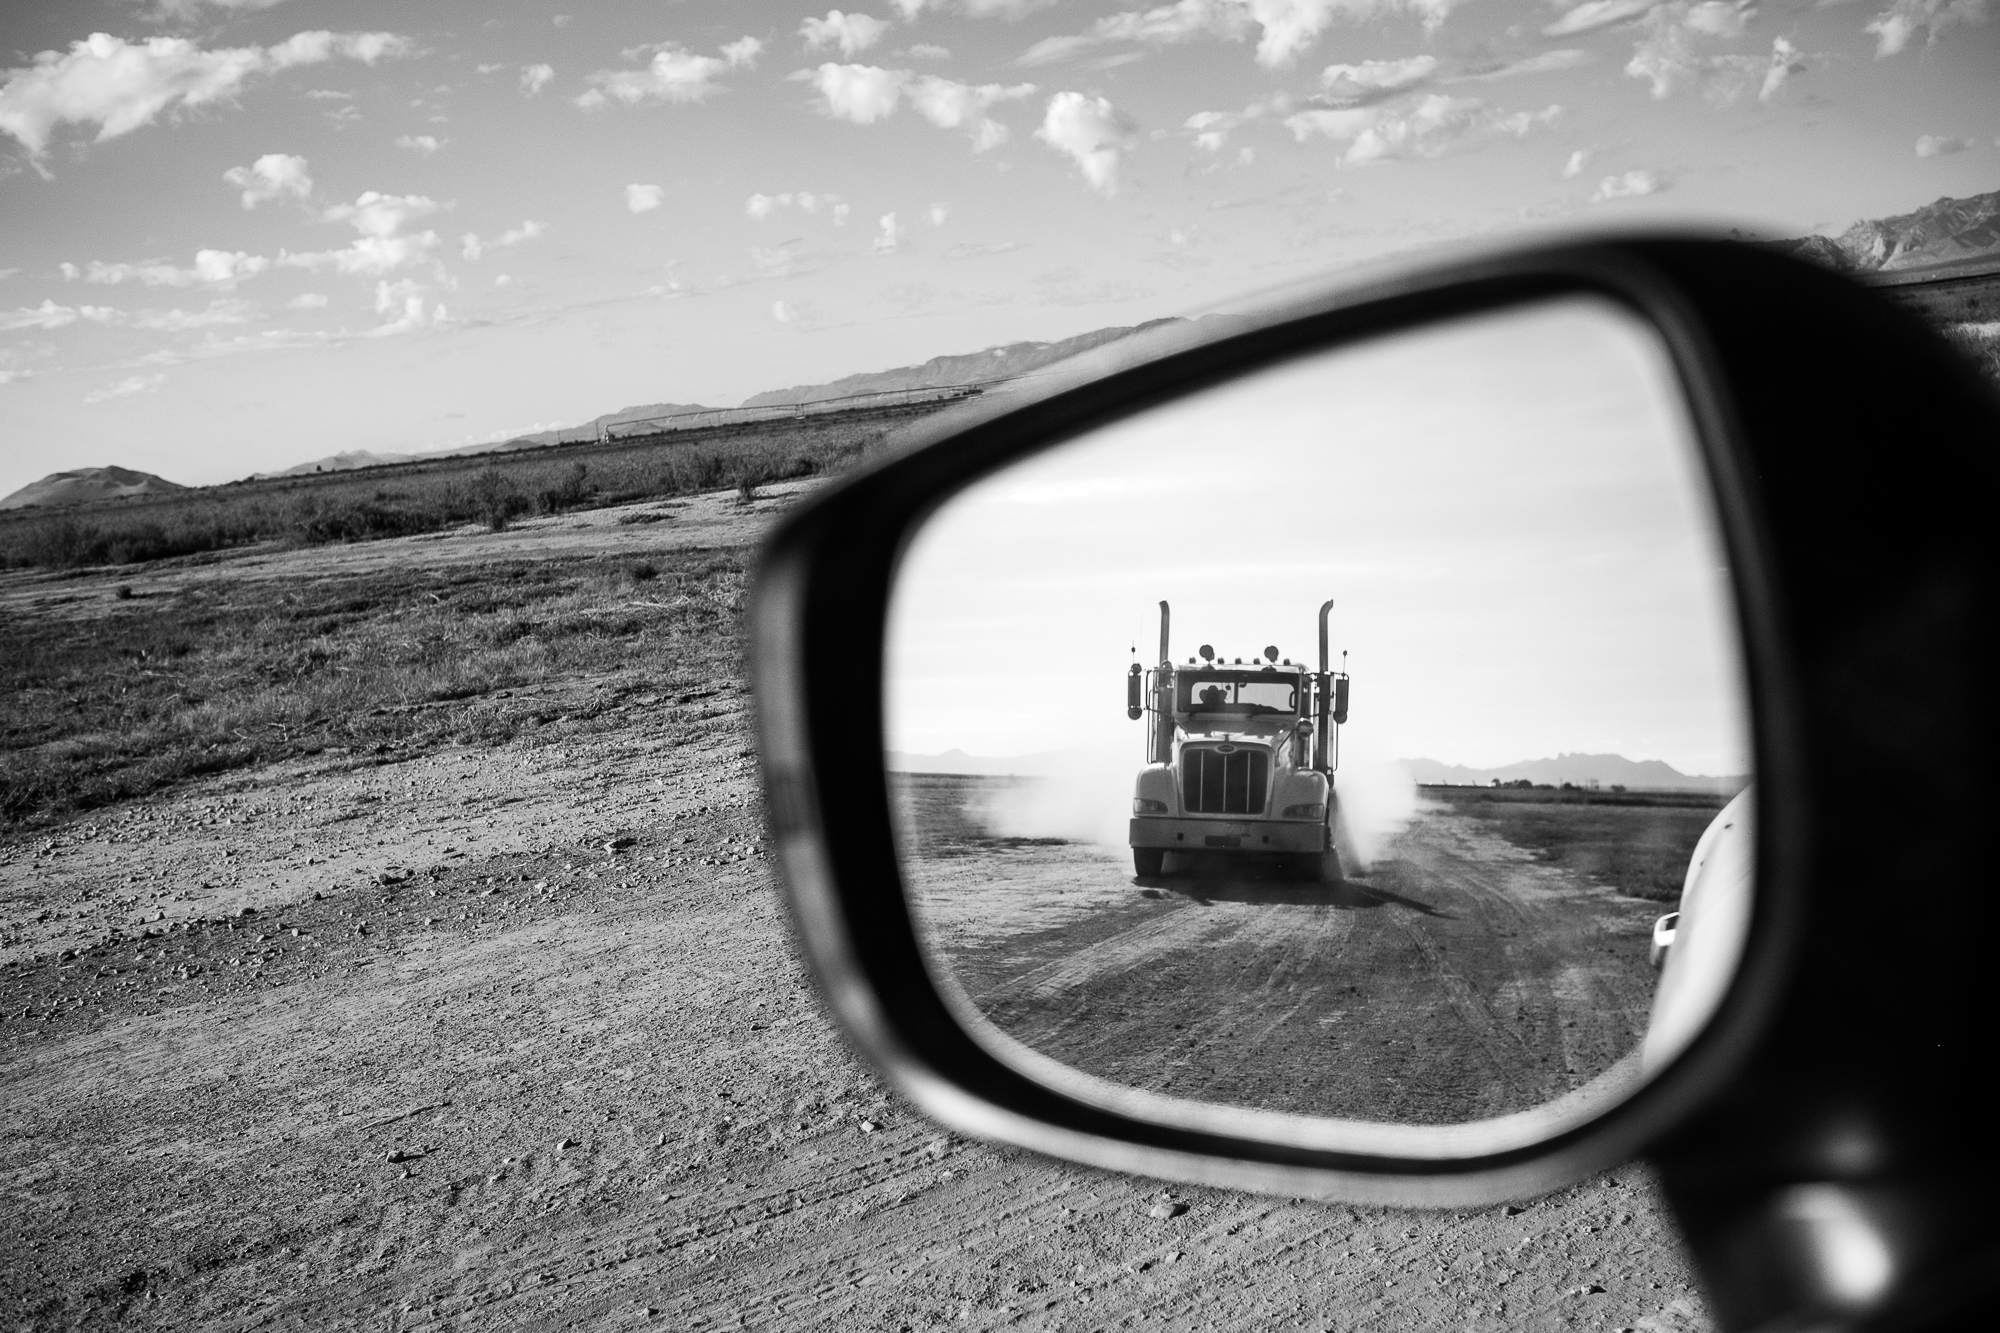 a rear view mirror shows a truck driving down a dusty road